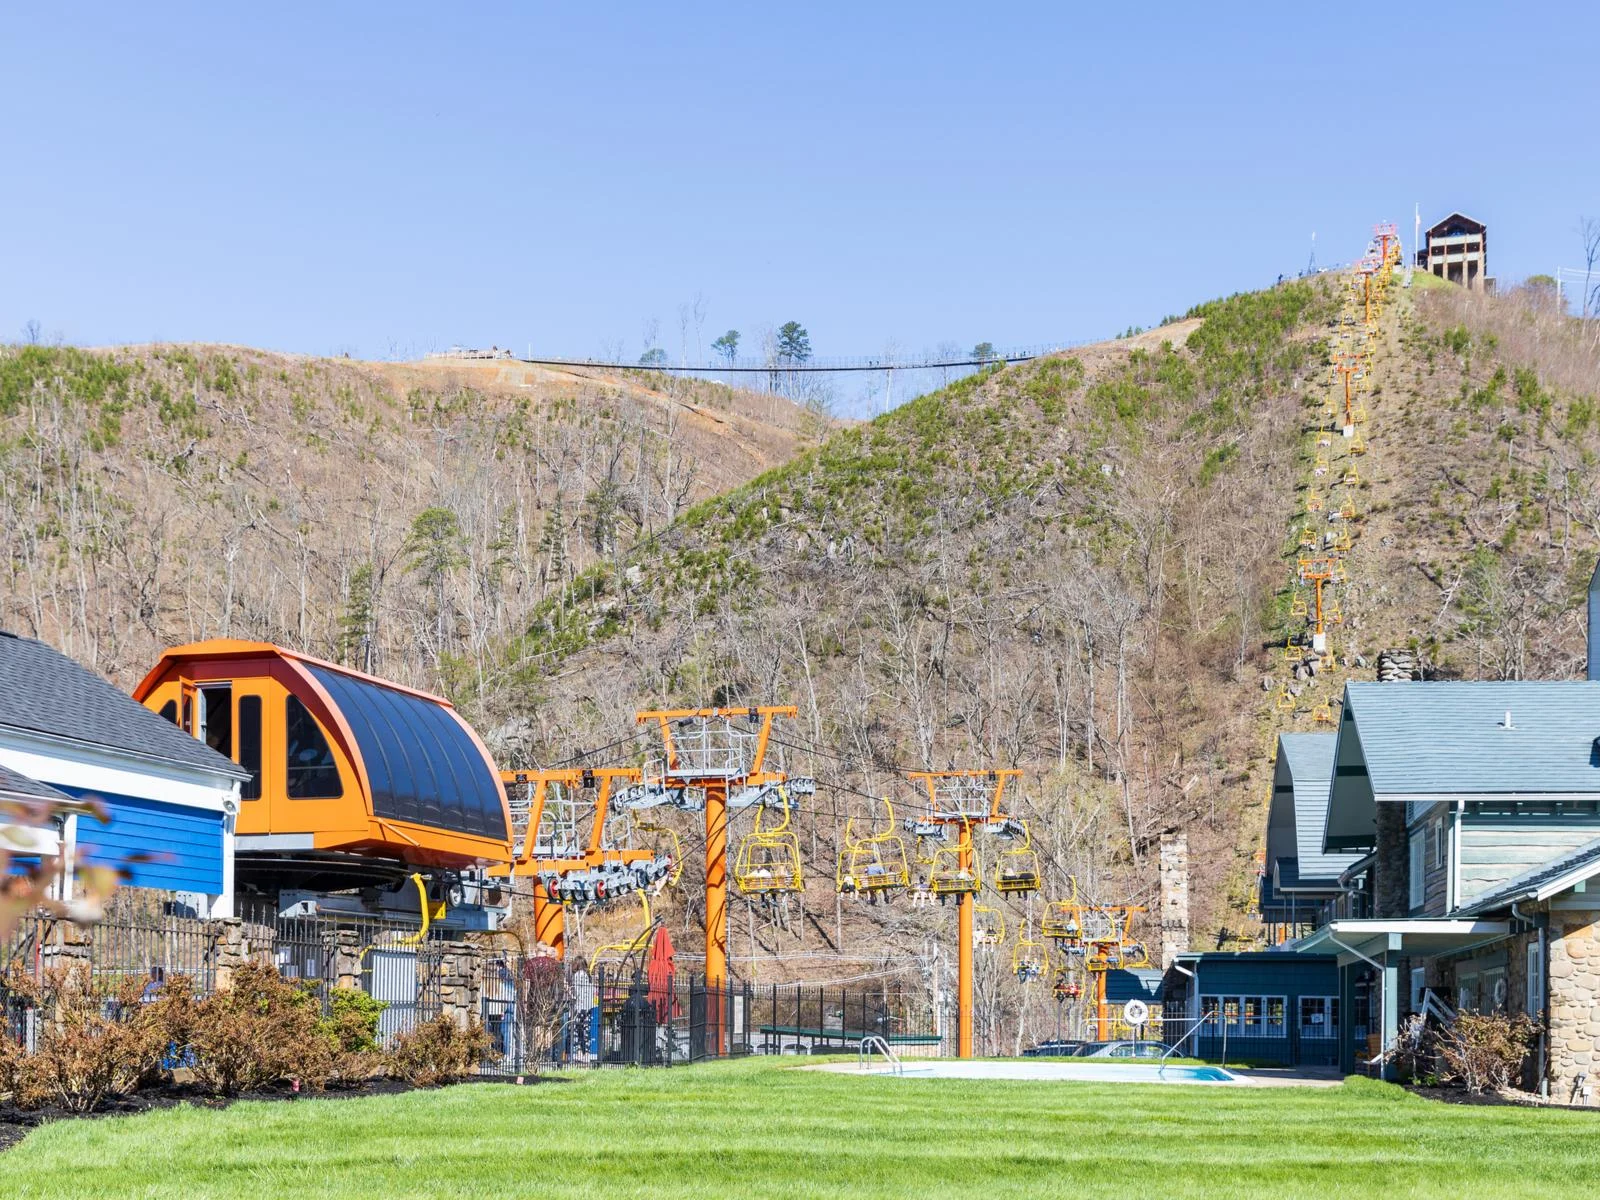 yellow chairlifts taking people to the peak of a mountain and a highly elevated suspension bridge where people are walking are one of the best things to do in gatlinburg, tennessee